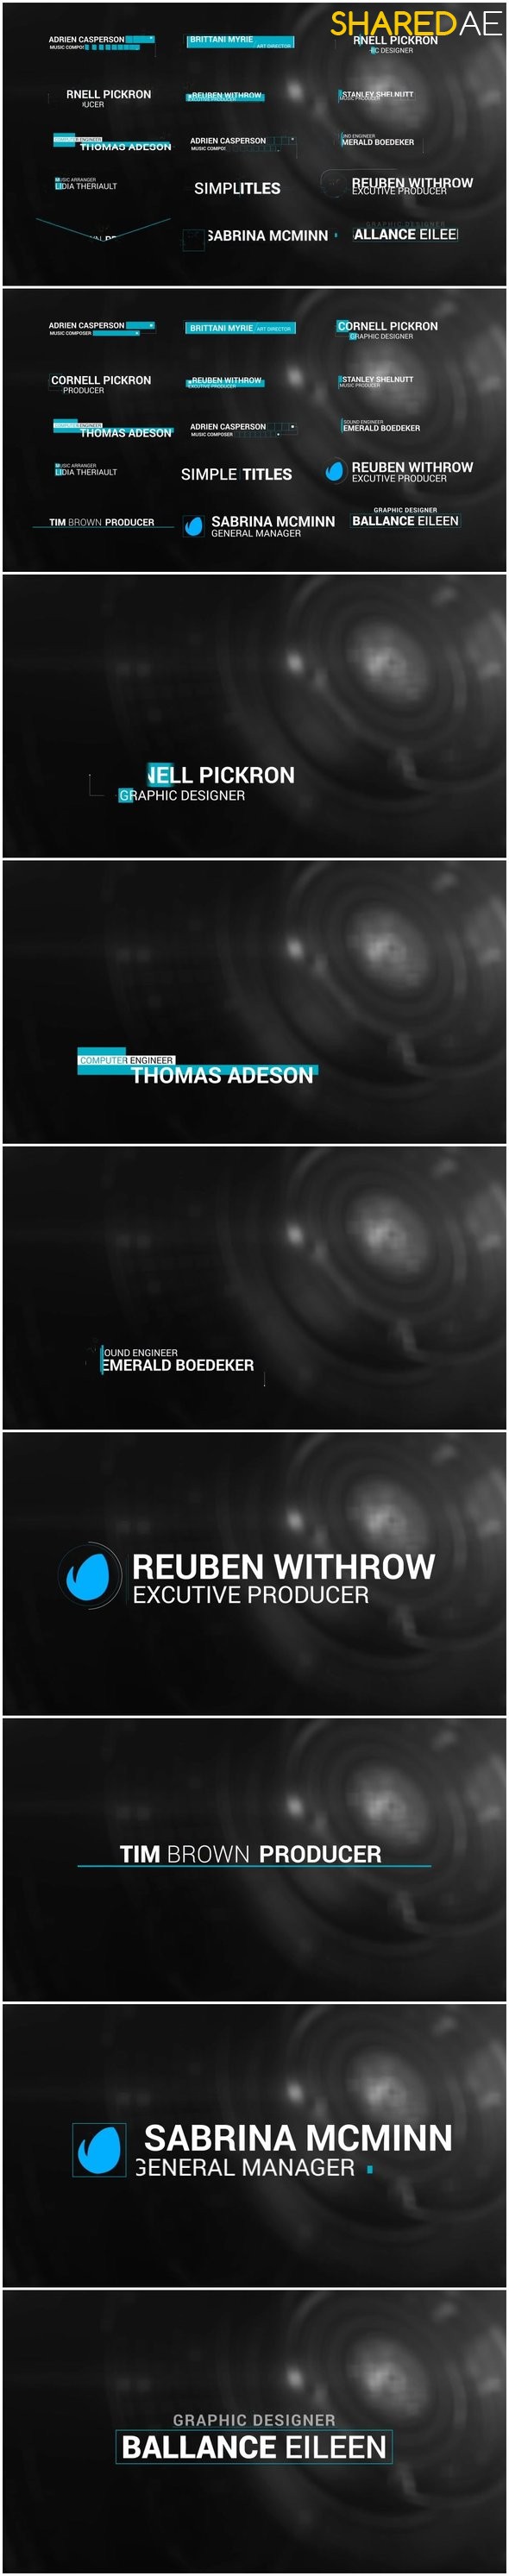 15 Minimal Lower Third 19901067 - Free After Effects Template